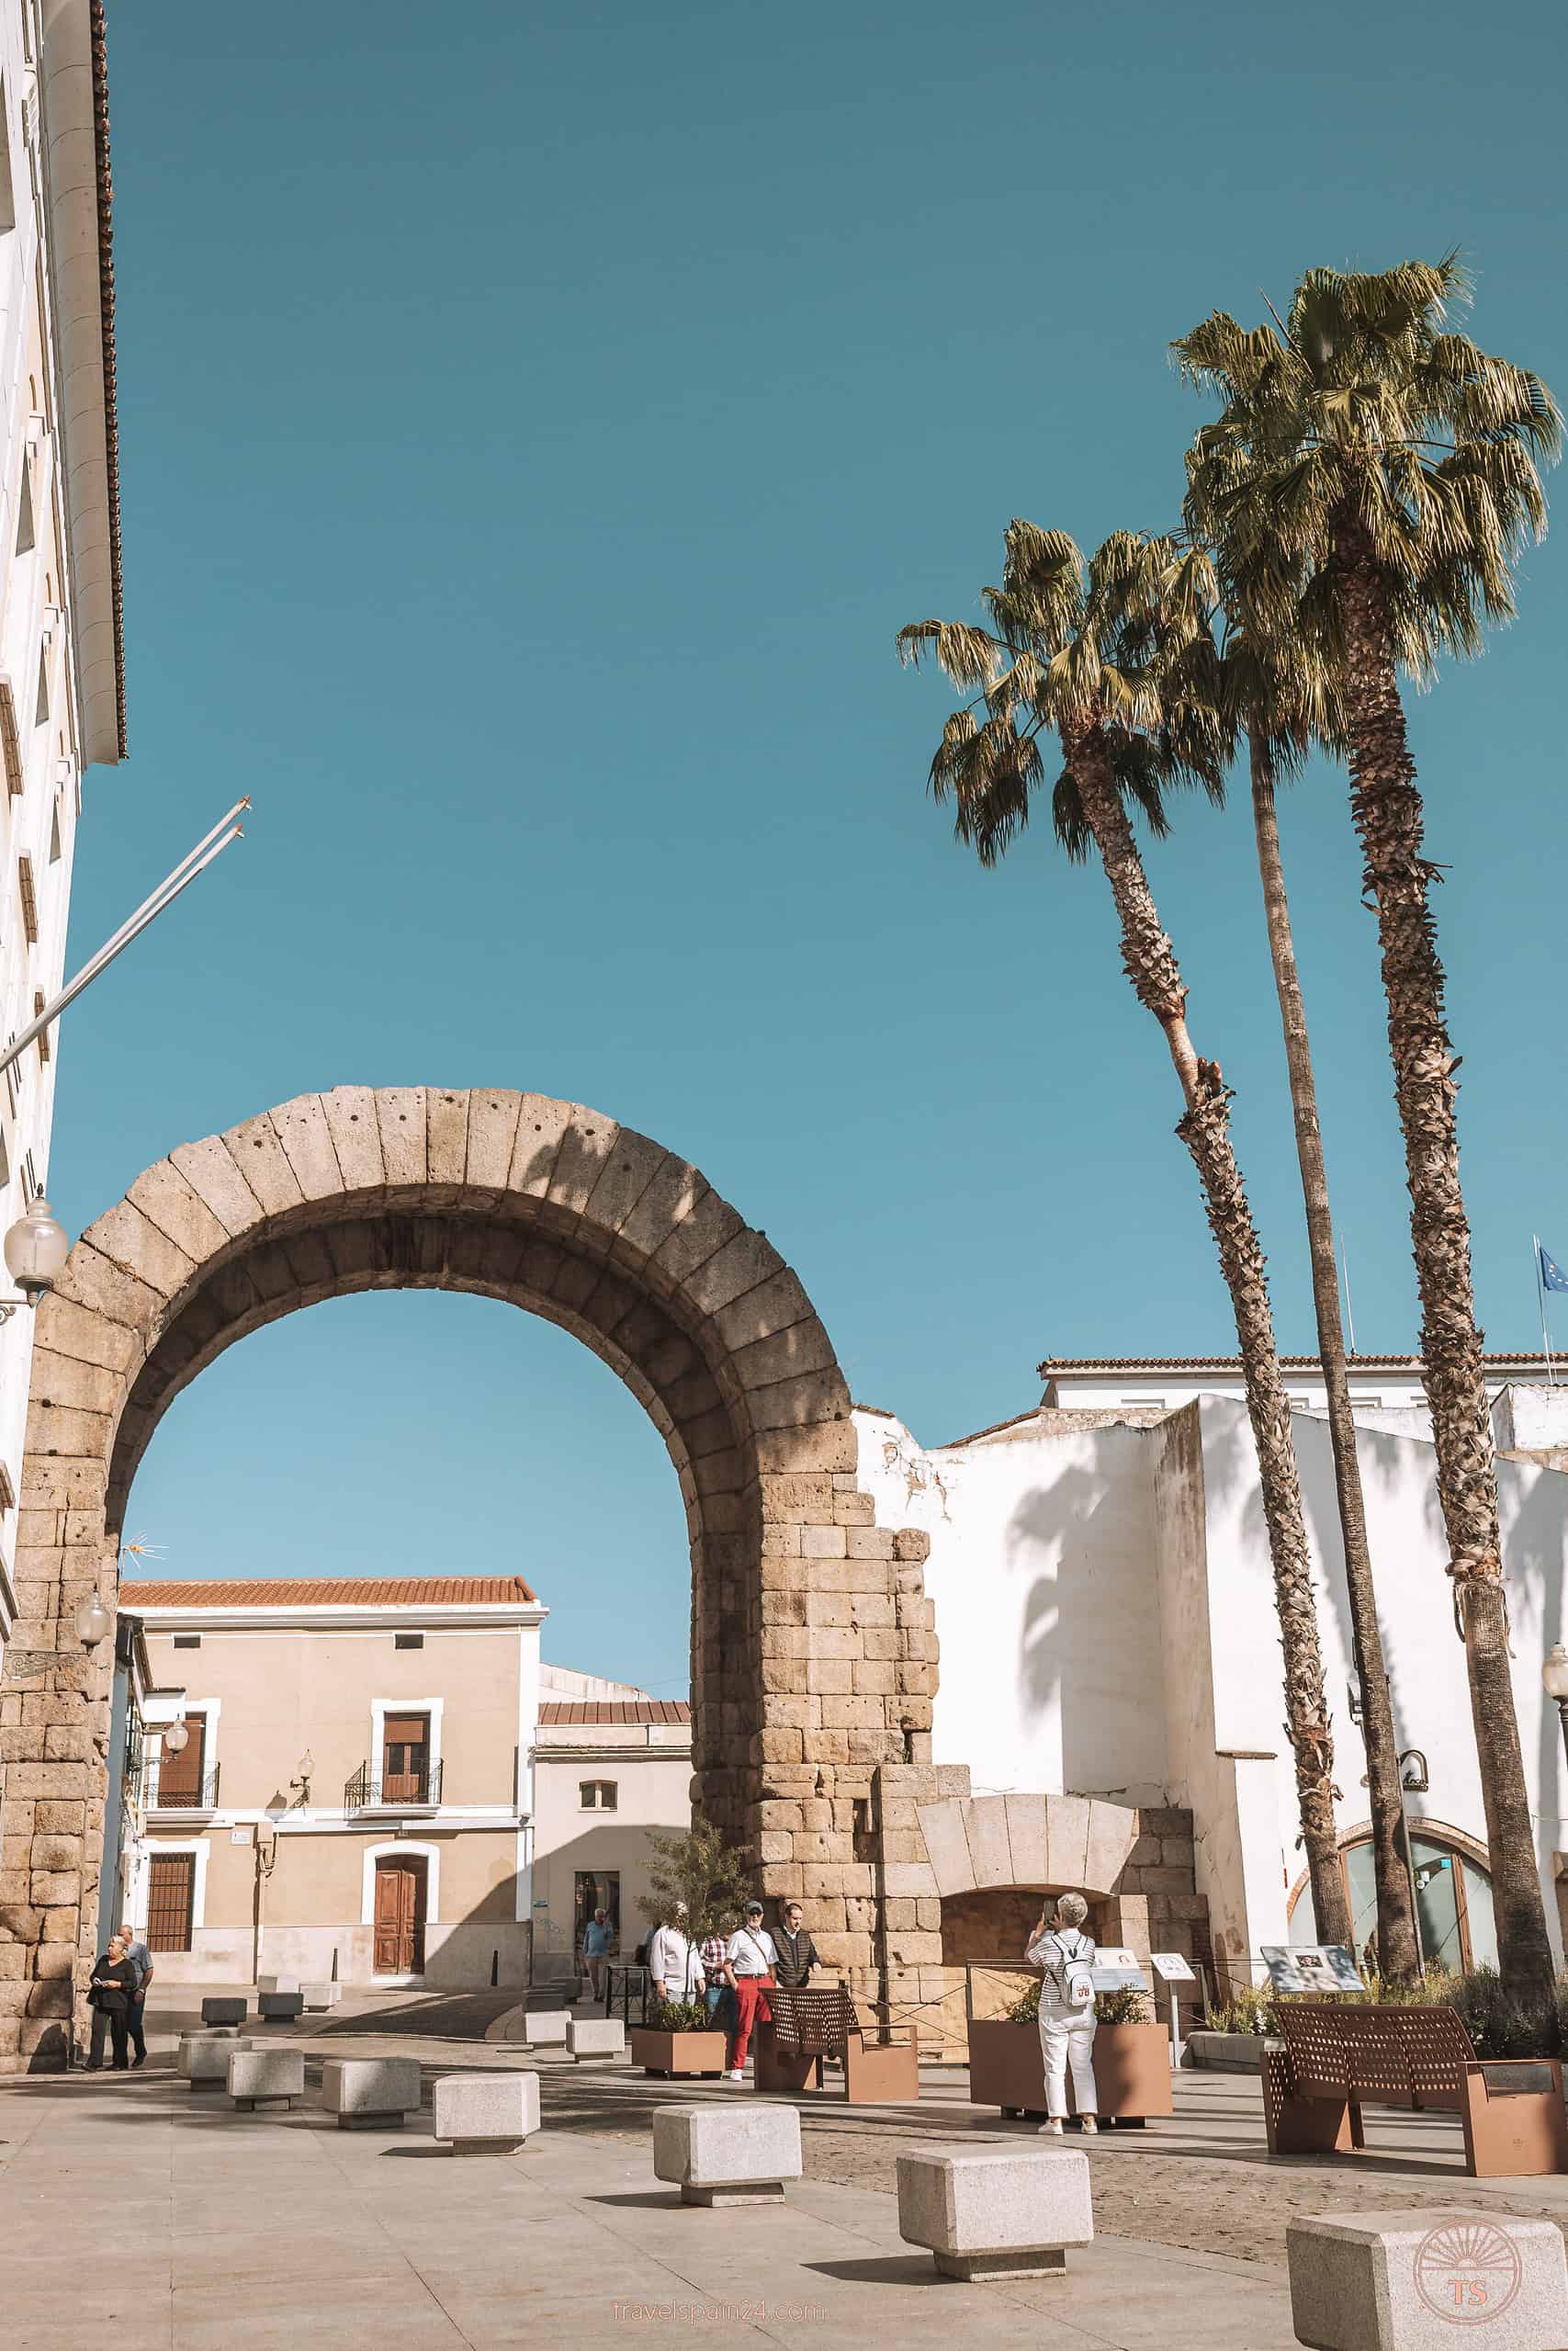 View of Trajan Arch in Mérida with people posing for photos, framed by palm trees, capturing a lively moment at this historic site.